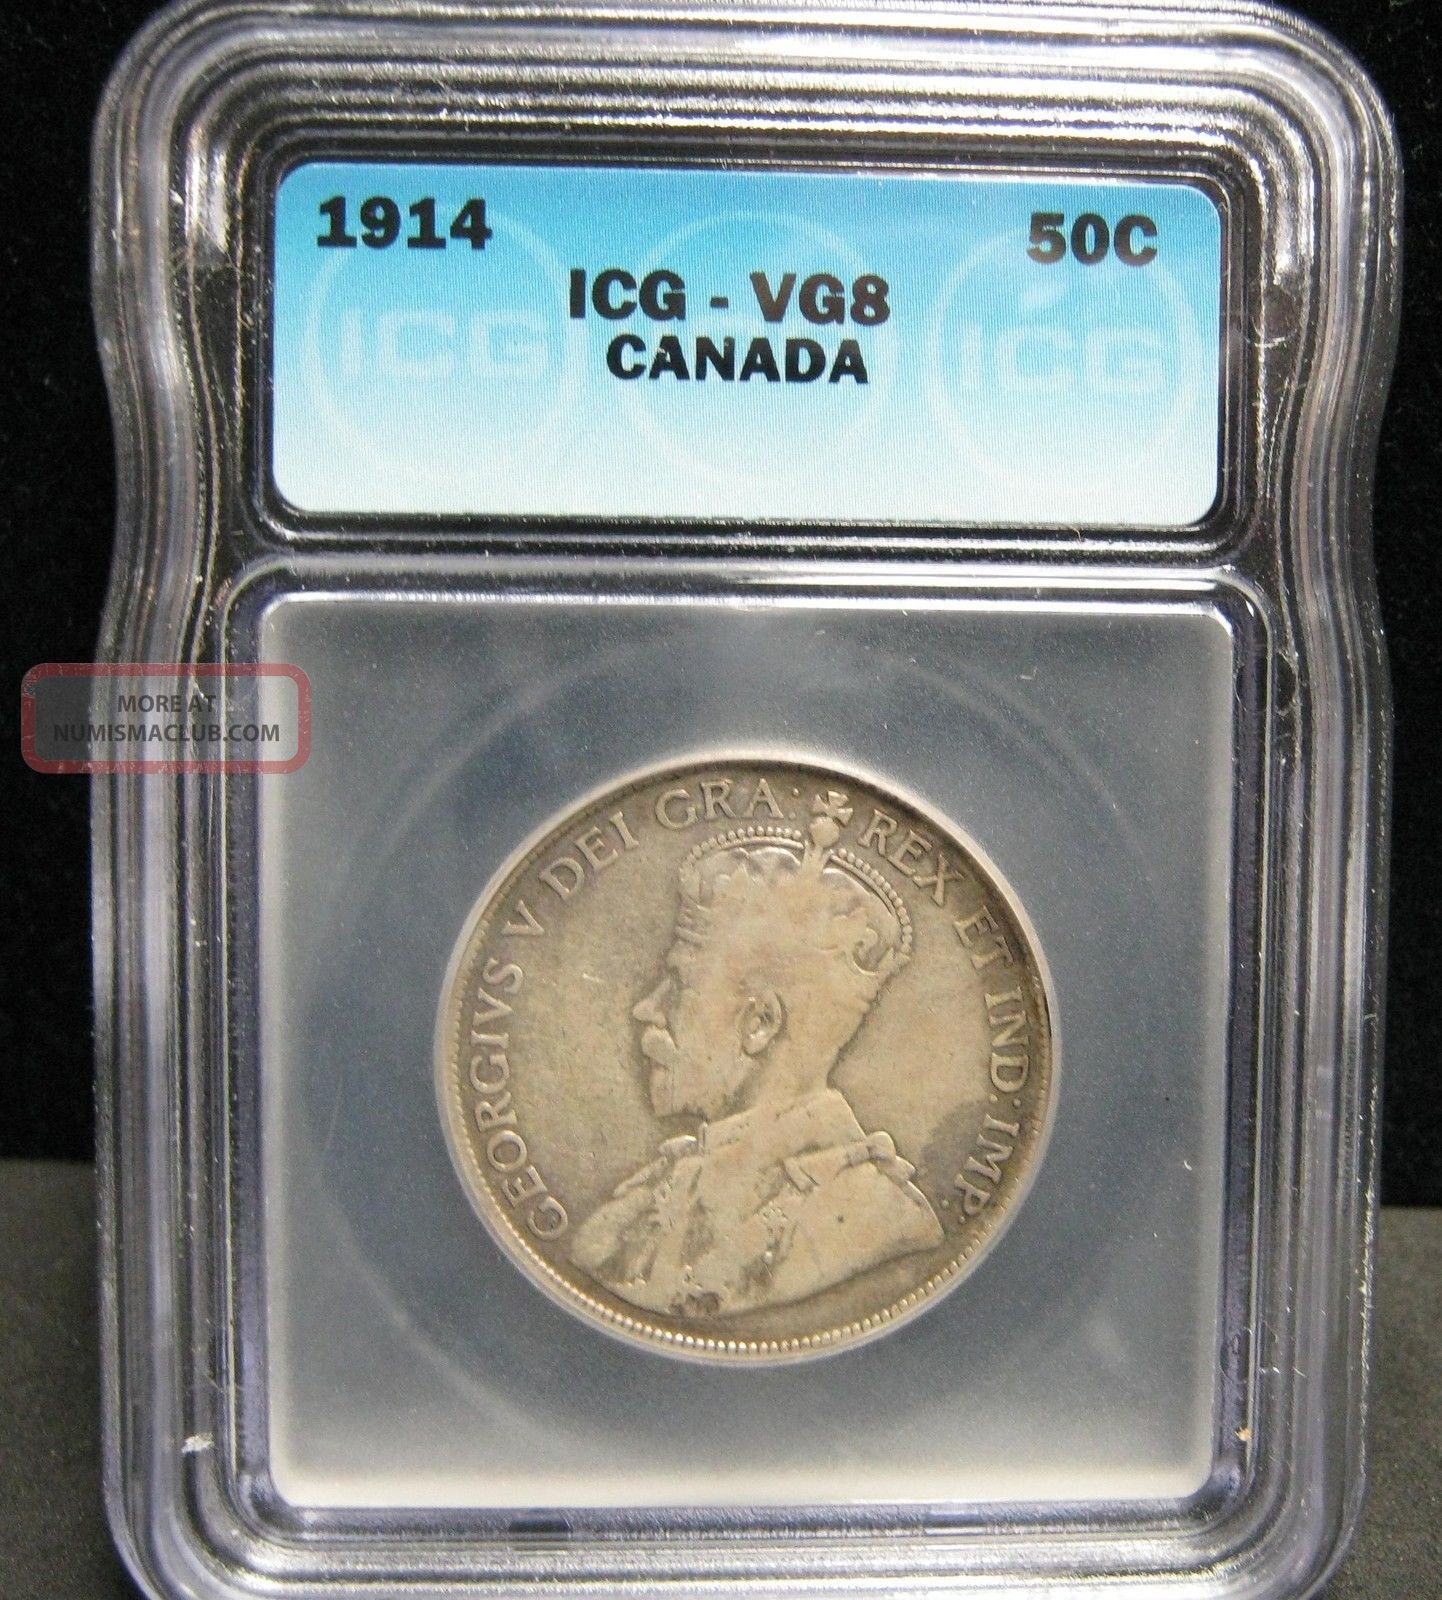 1914 Canada 50c Icg Vg8 - 3801 Five Cents (1858-1921) photo